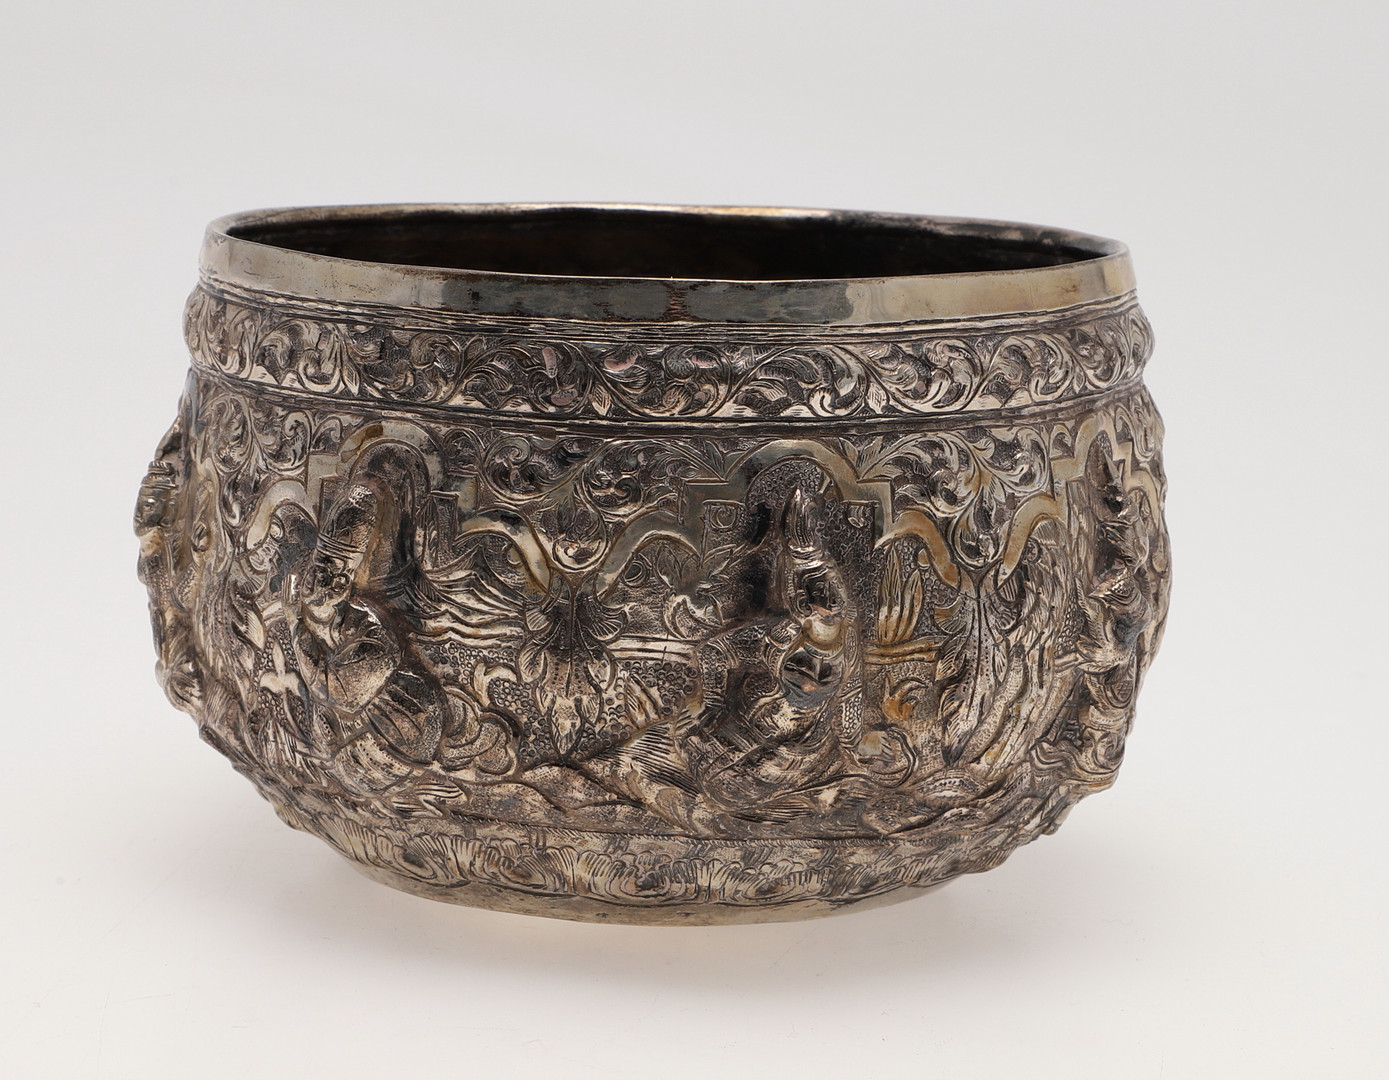 A LATE 19TH/ EARLY 20TH CENTURY INDIAN/ BURMESE SILVER RICE BOWL. - Image 2 of 5